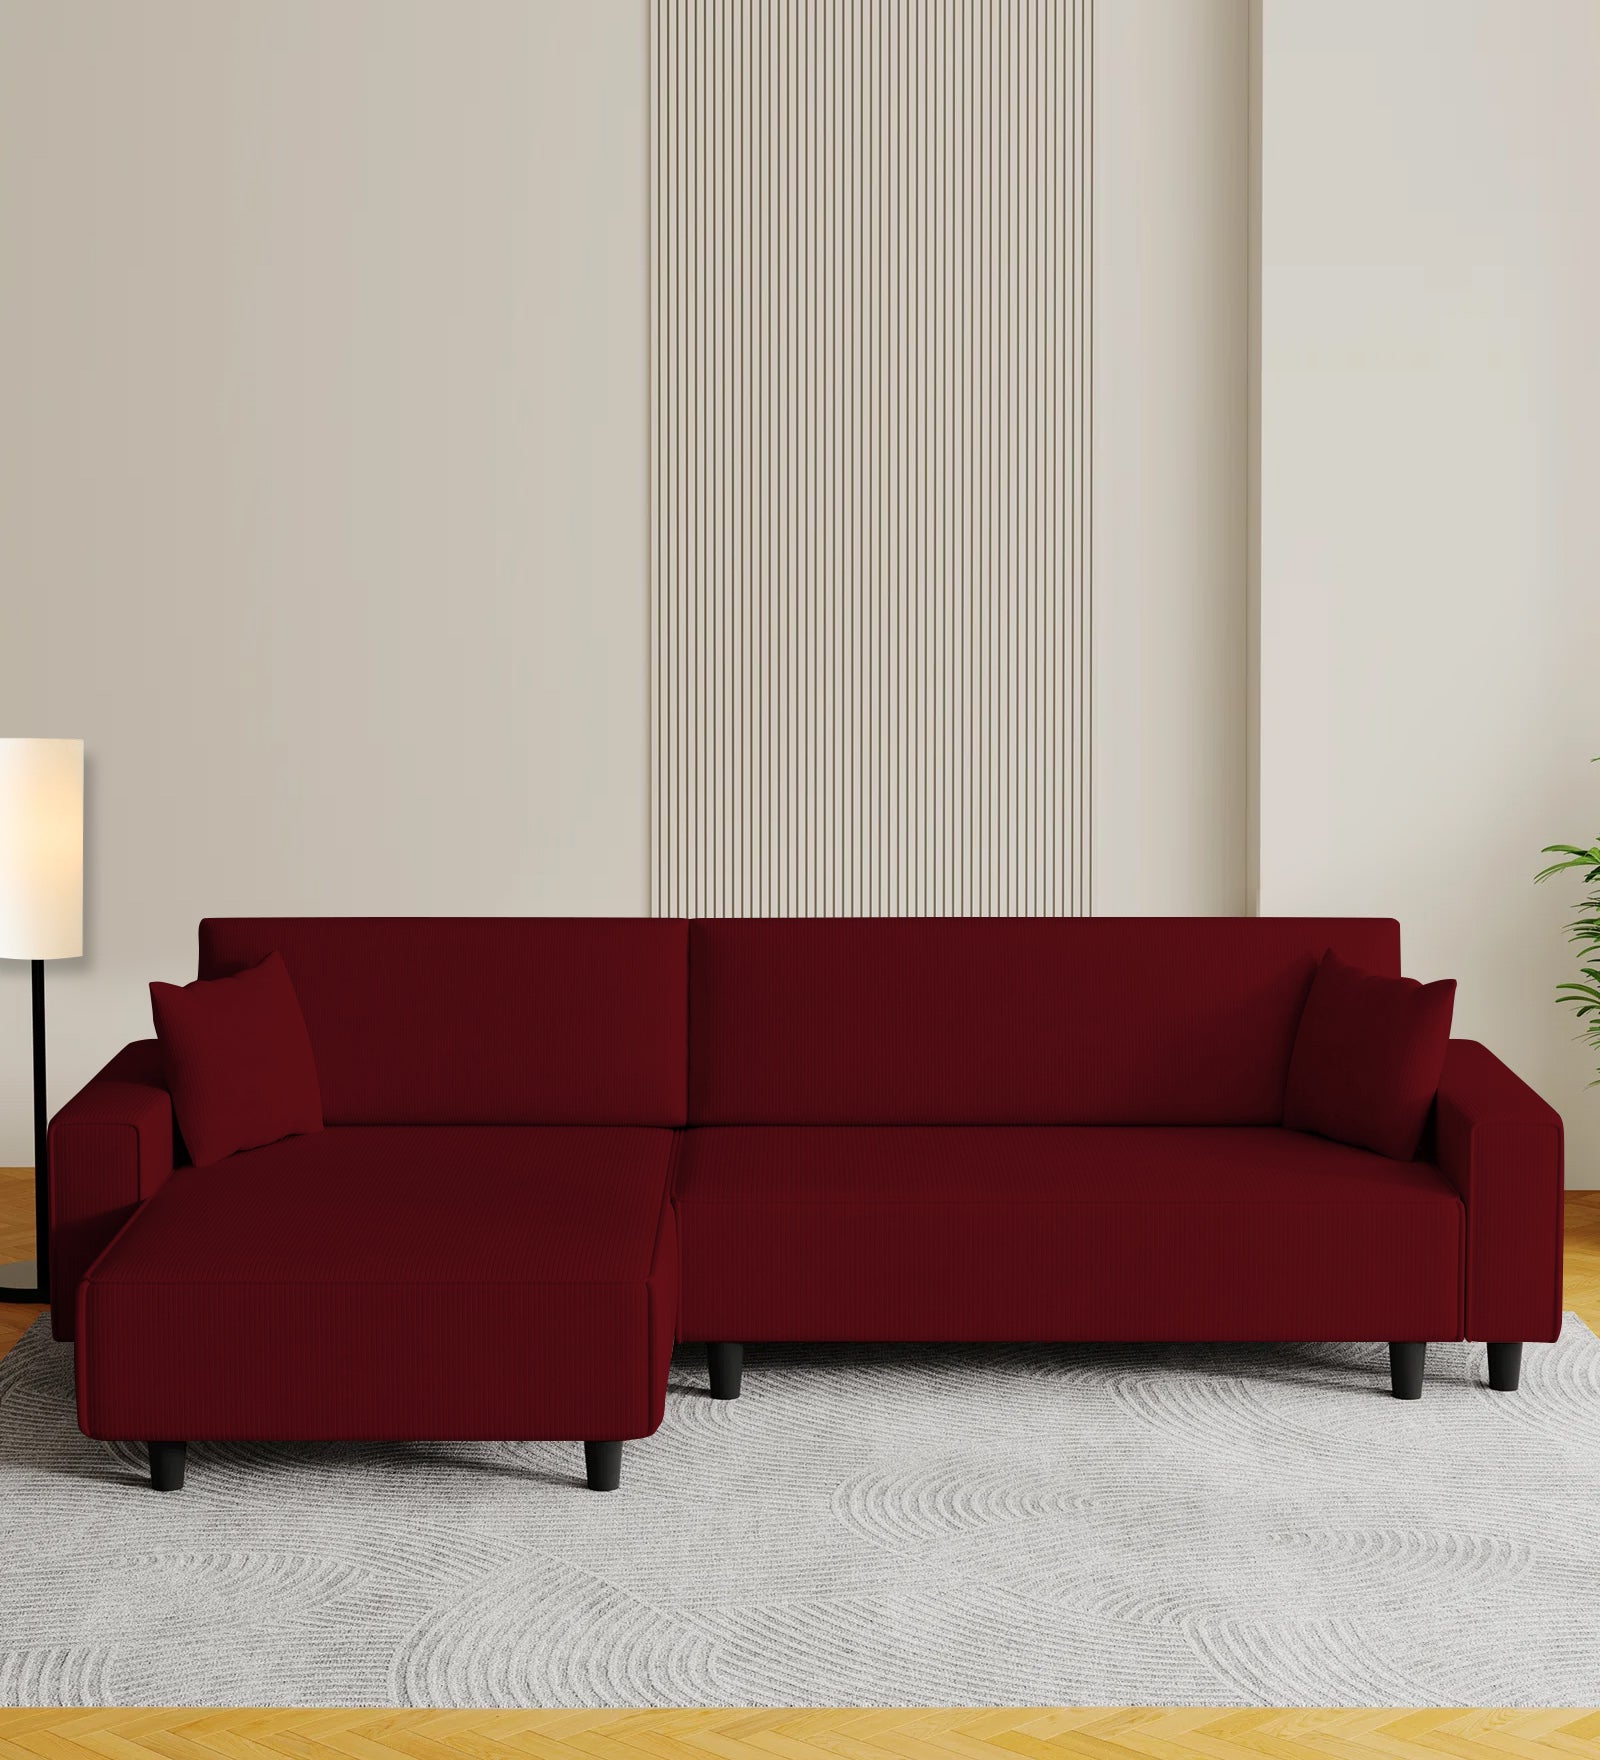 Peach Fabric RHS 6 Seater Sectional Sofa Cum Bed With Storage In Ruby Red Colour